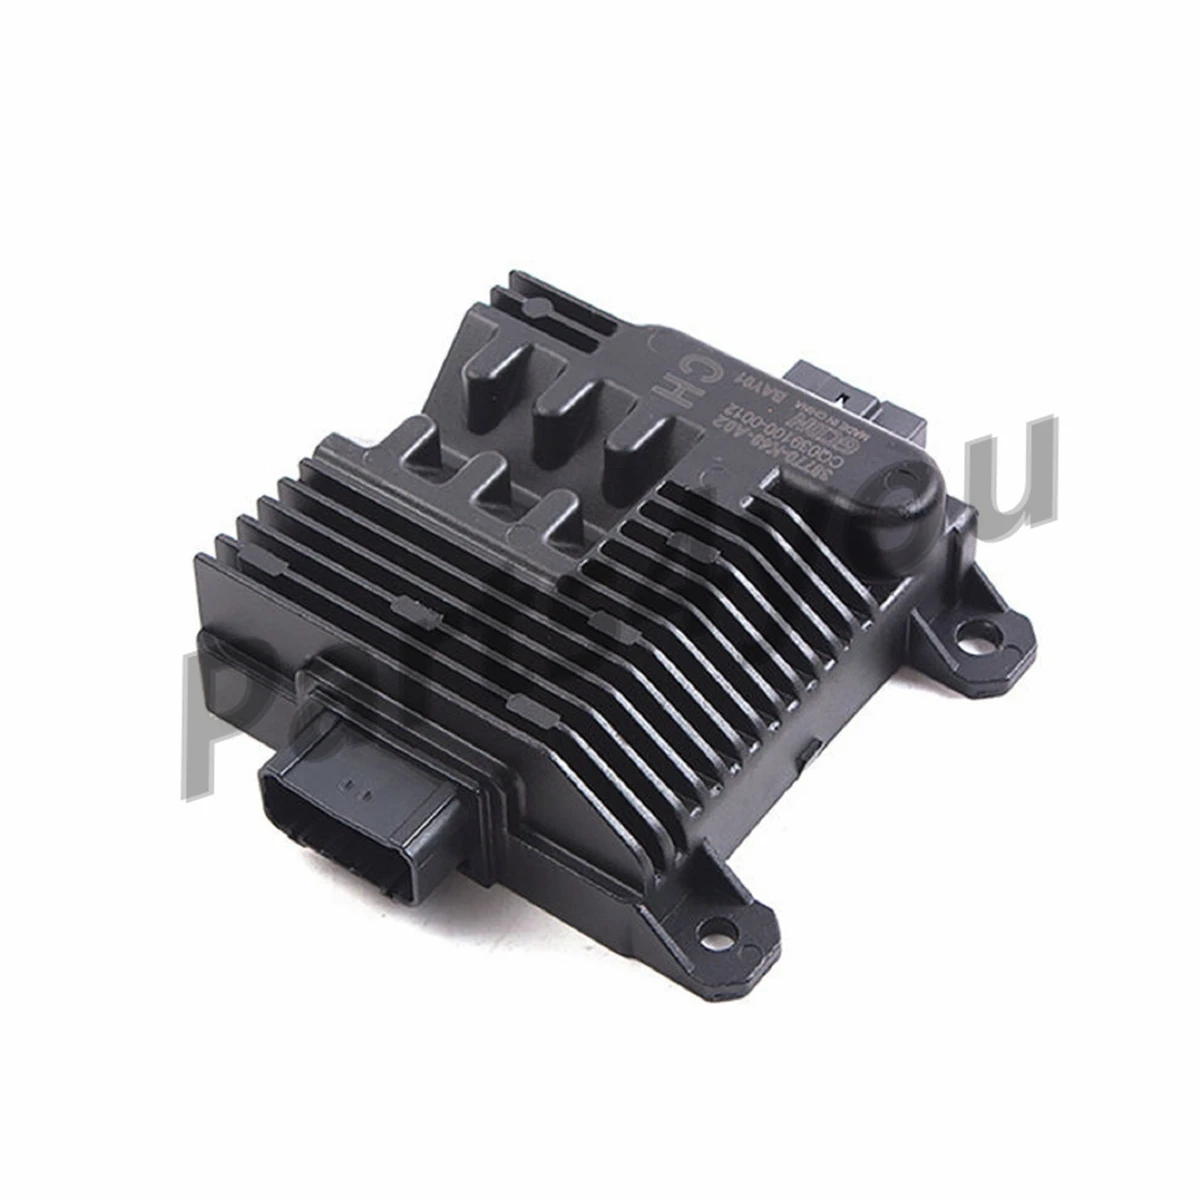 Motorcycle Engine Control Unit ECU CDI Scooter For Honda Spacy Alpha 110 SDH110 WAVE125 SDH125 38770-K48-A02-M1